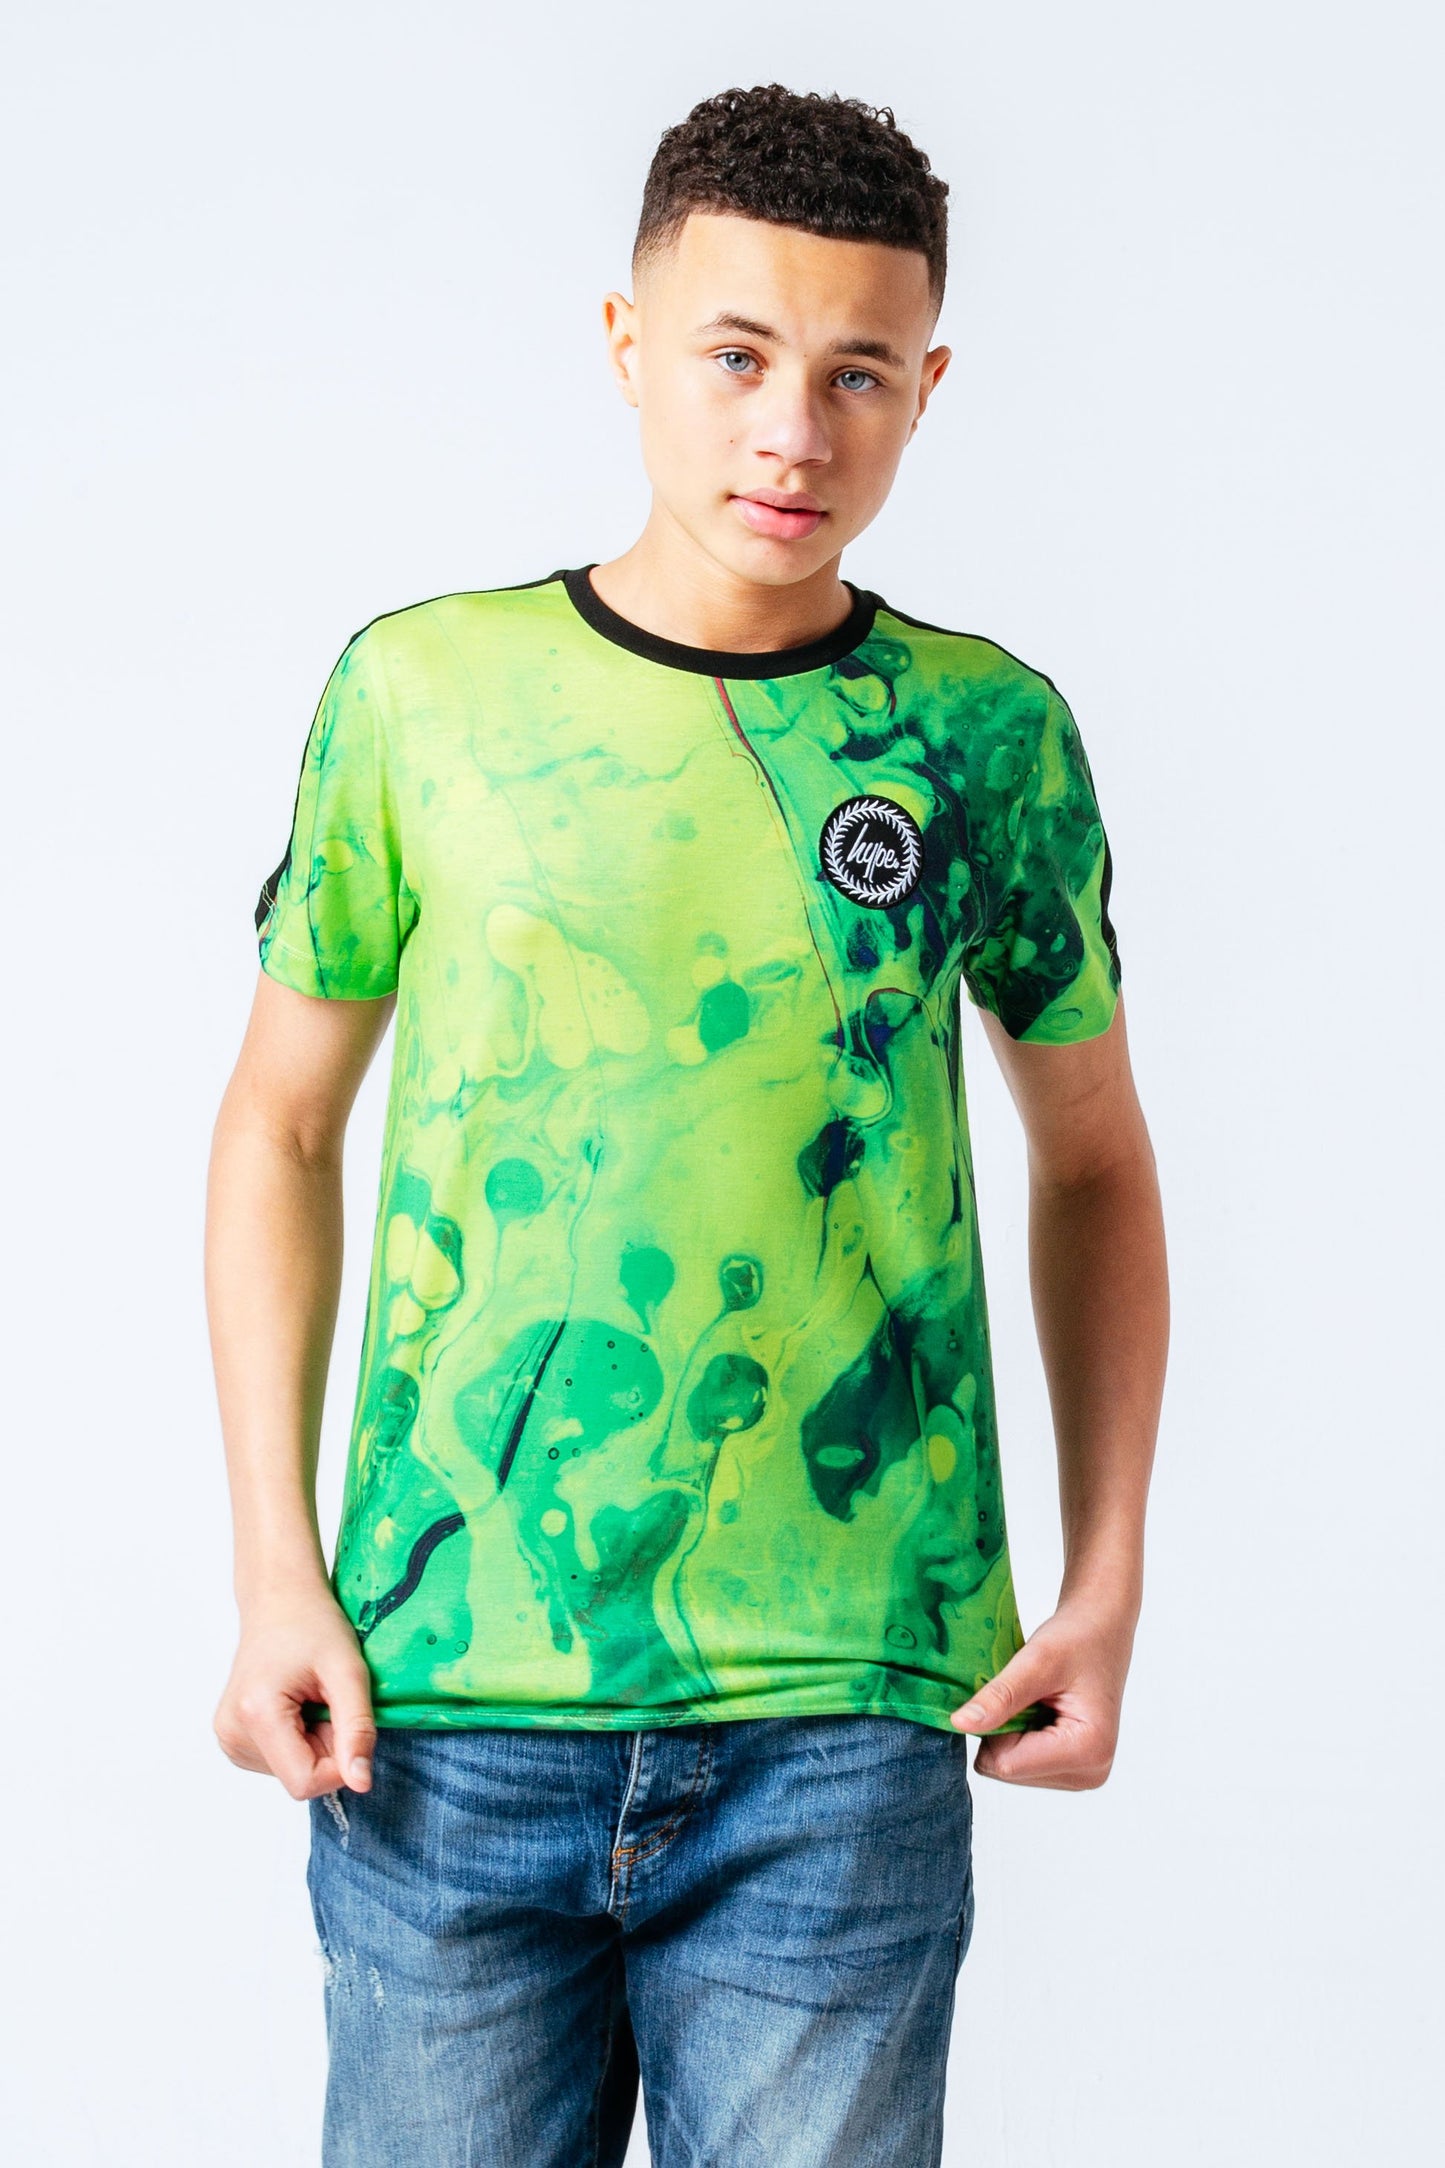 NEON MARBLE T-SHIRT FOR KIDS